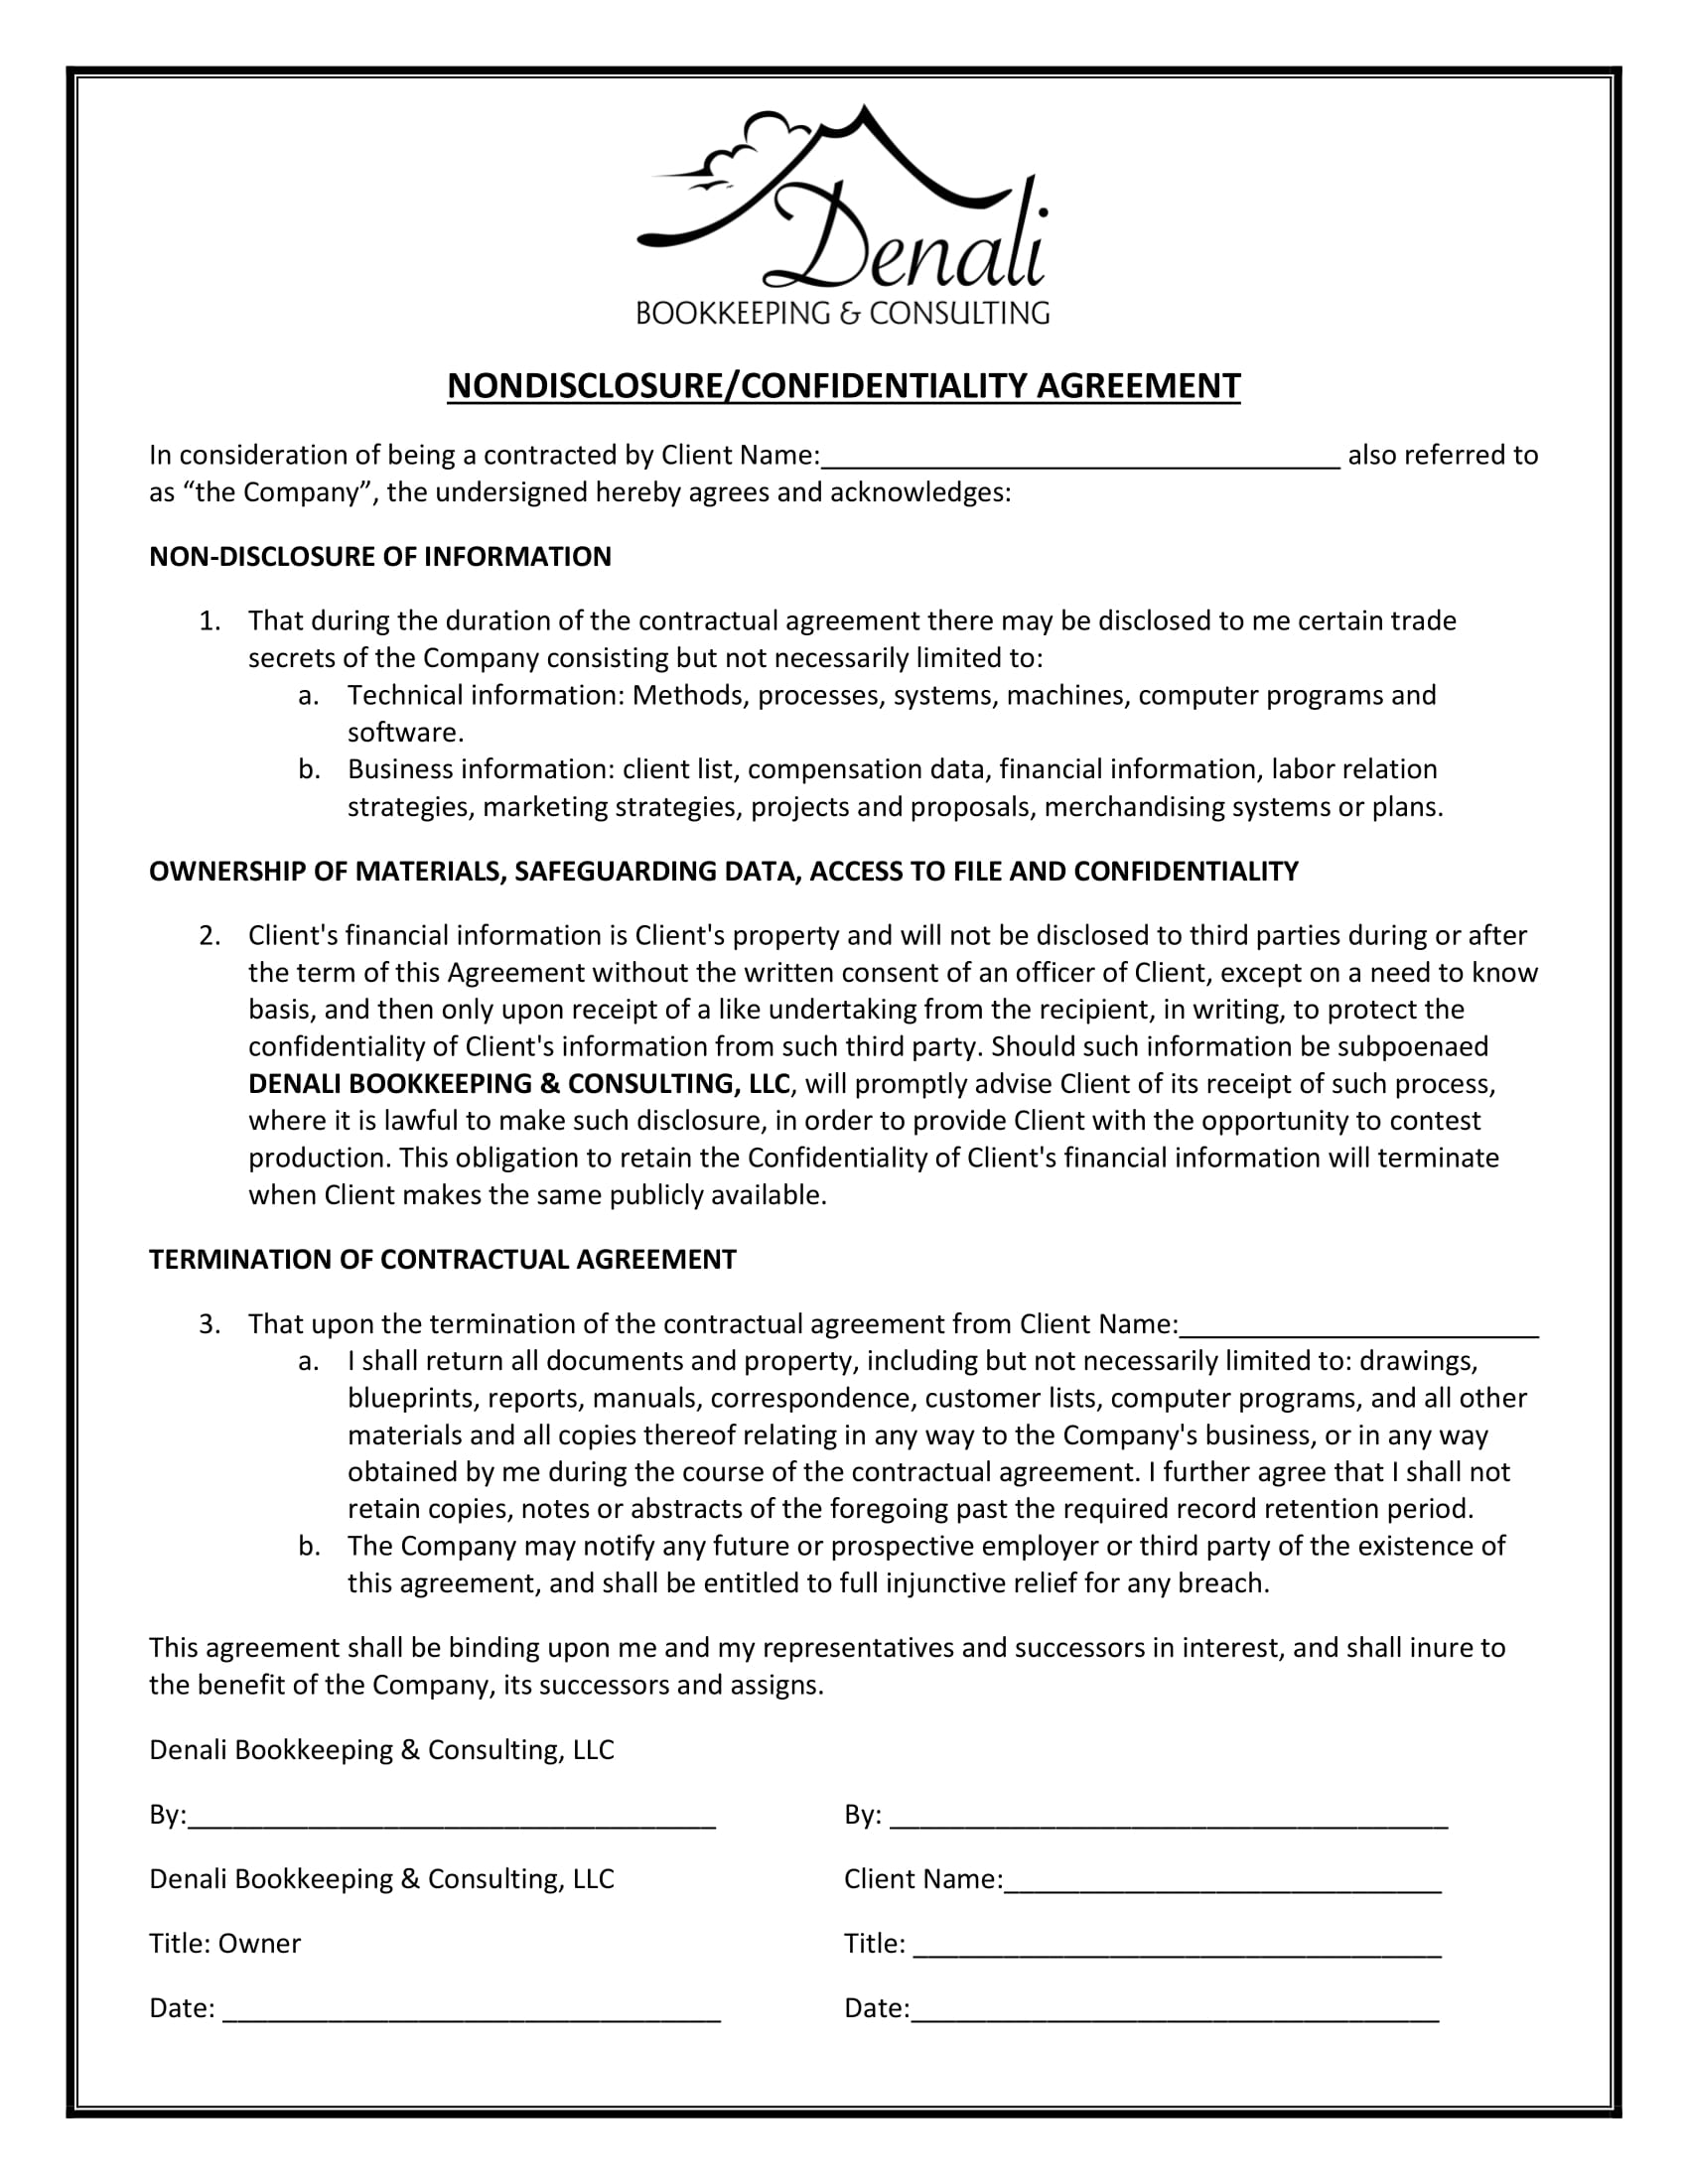 21+ Bookkeeper Confidentiality Agreement Examples - DOC, PDF Within accountant confidentiality agreement template